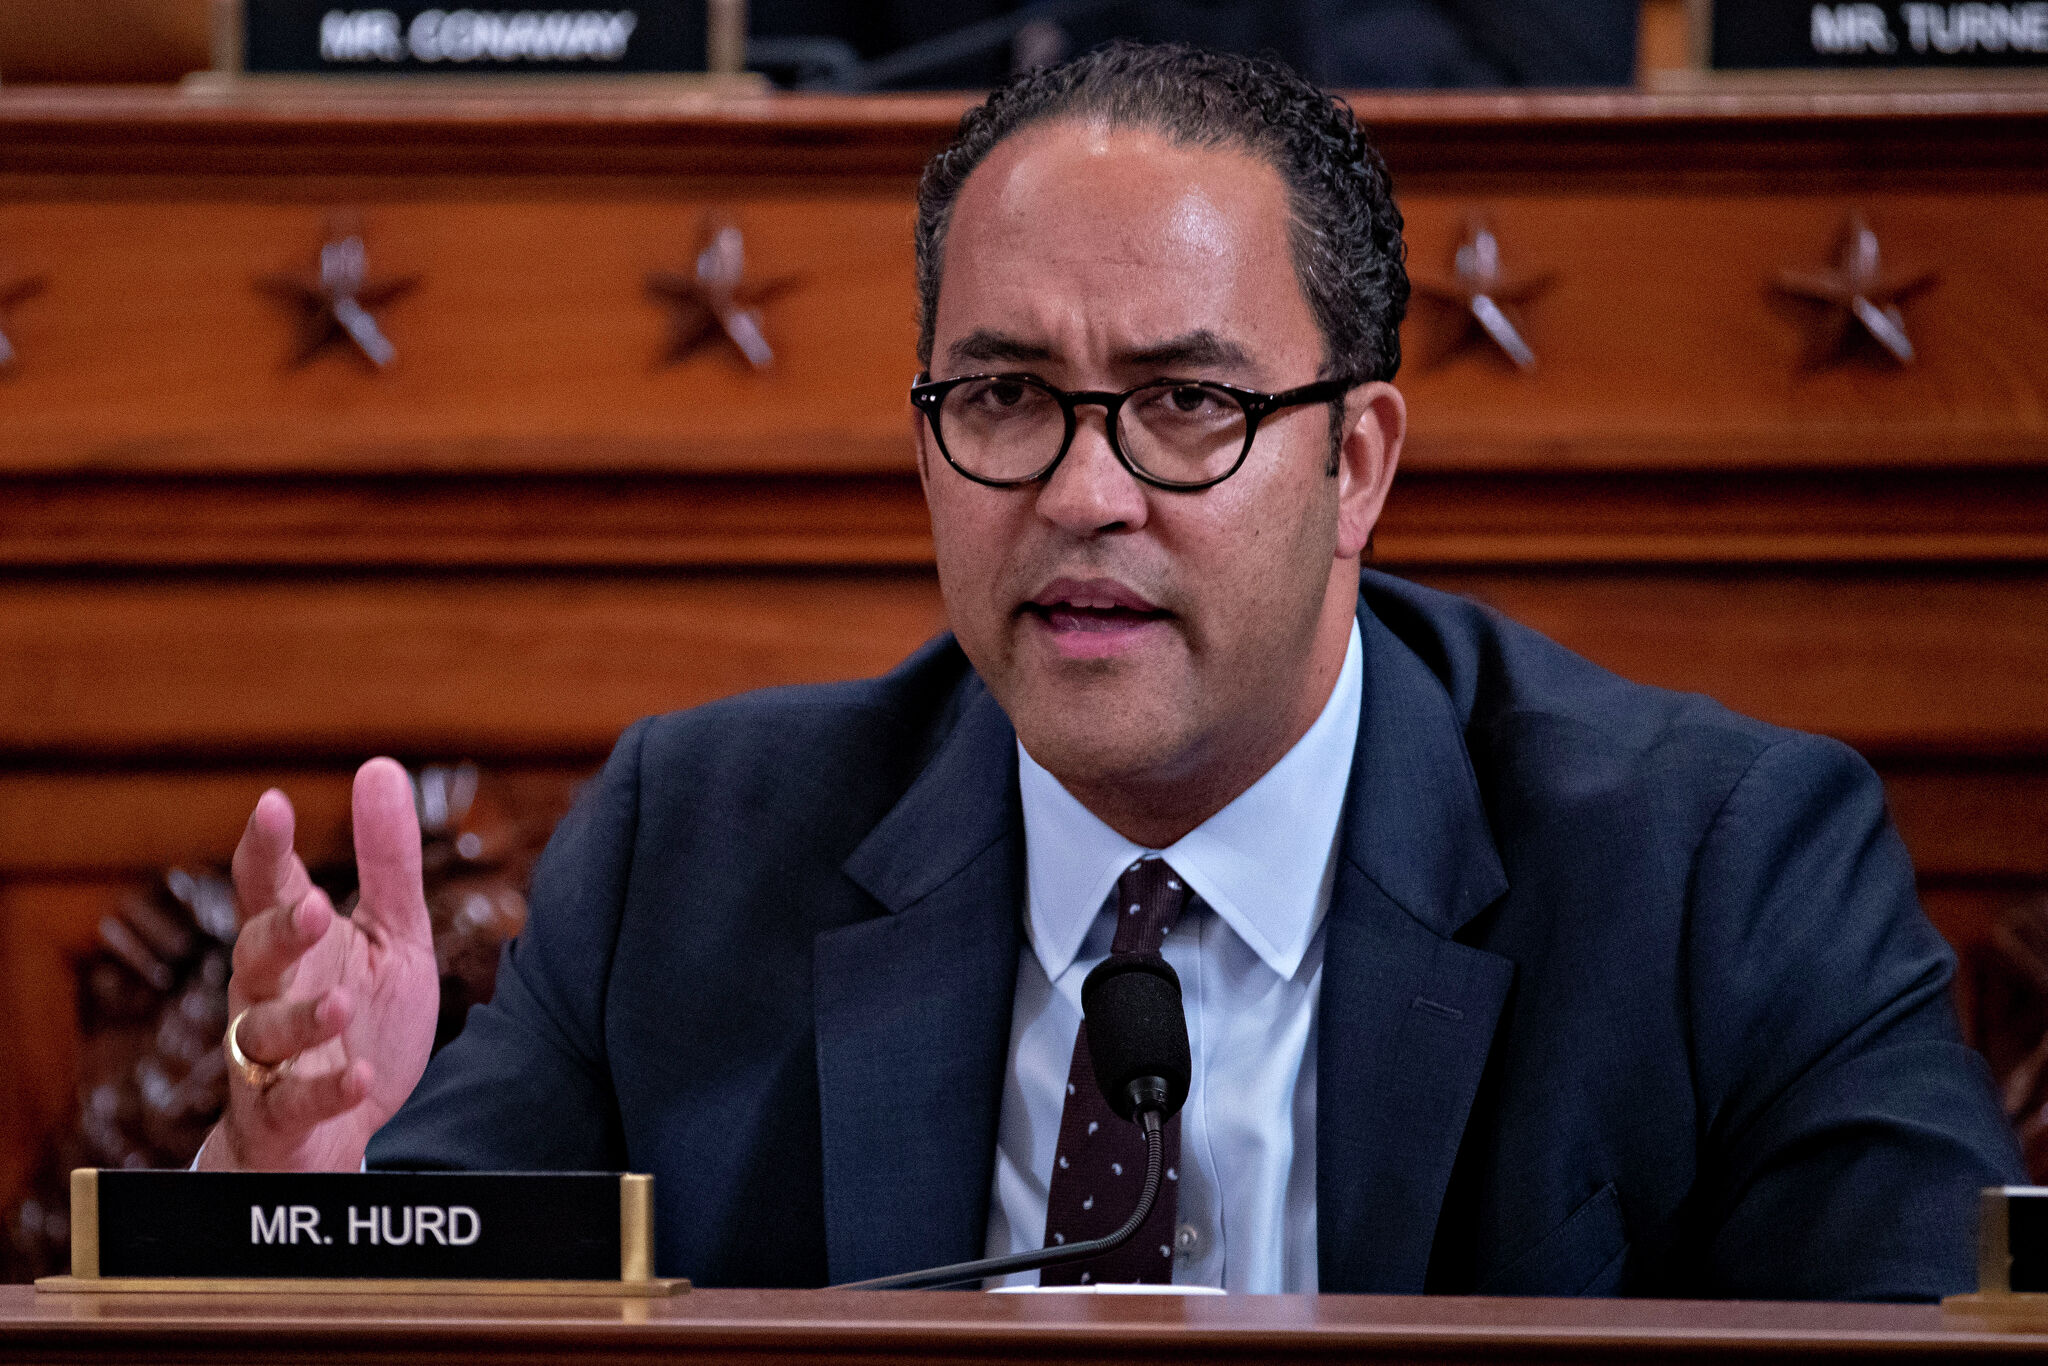 Will Hurd drops out of 2024 presidential race